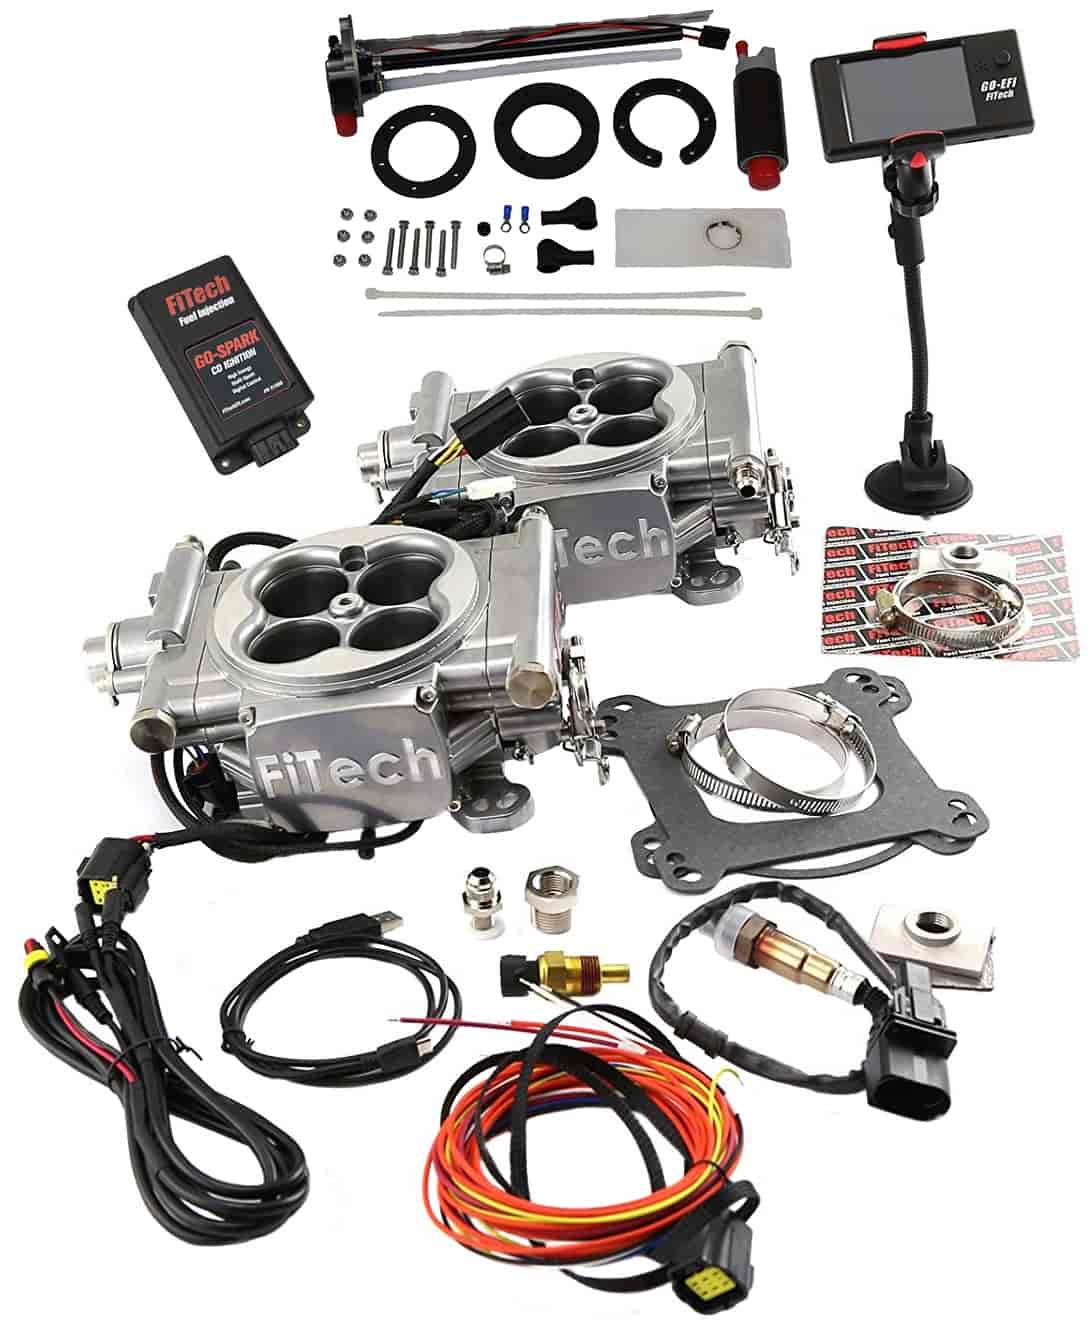 Go EFI 2x4 625 HP Dual Quad Throttle Body Fuel Injection Master Kit [With Go-Fuel Universal In-Tank Pump Module 340 LPH & CDI Bo